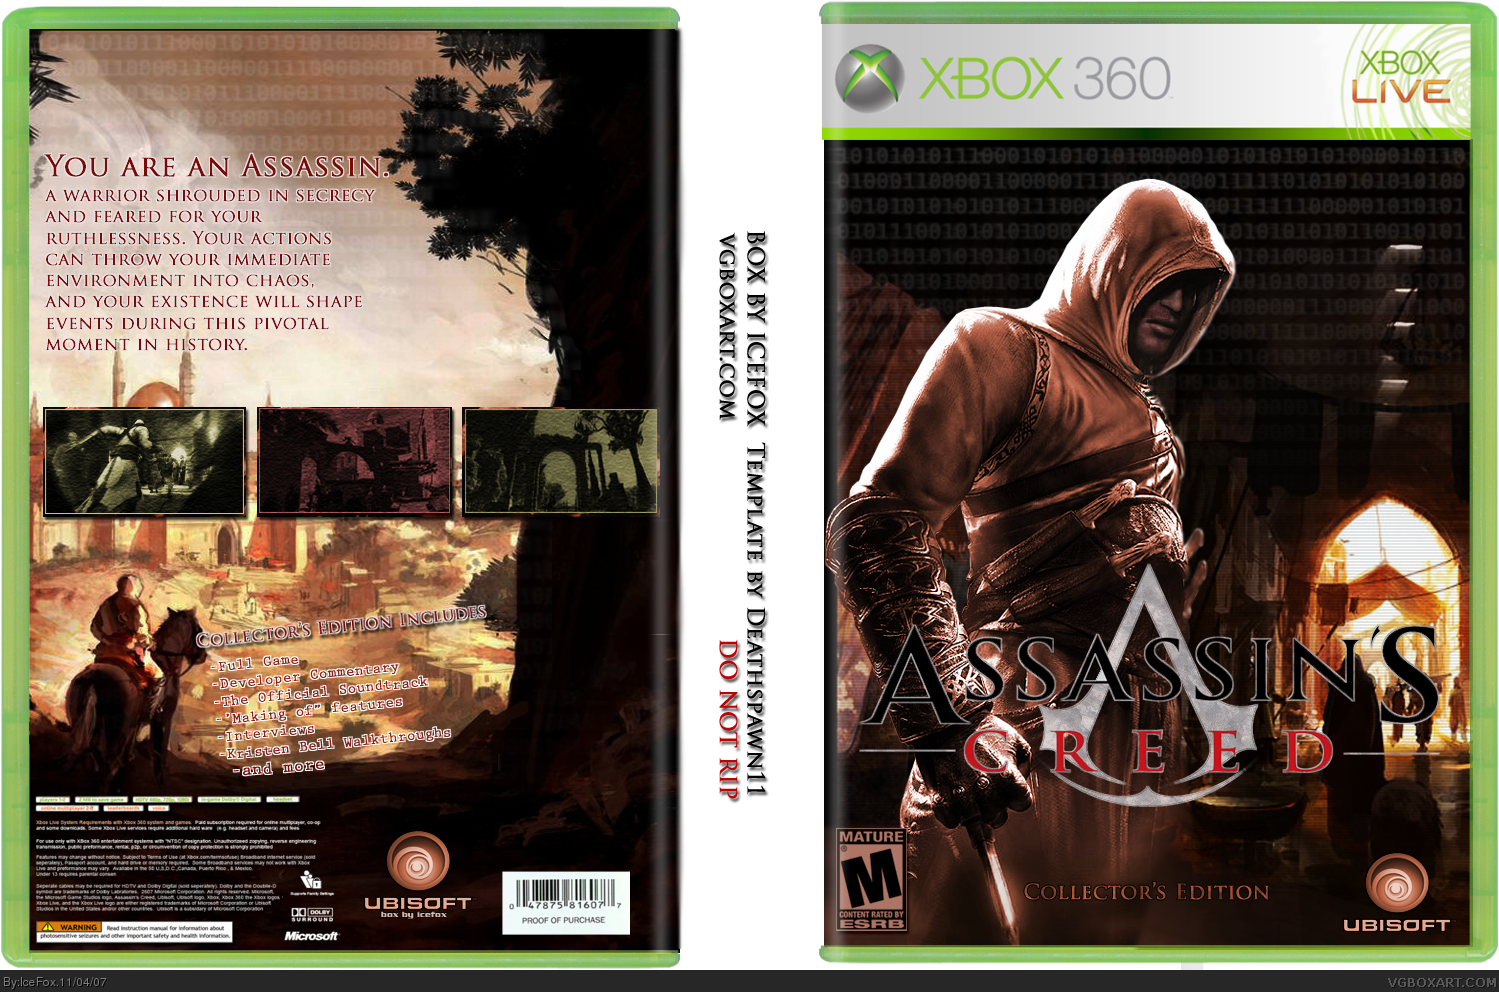 Assassin's Creed Special Edition box cover